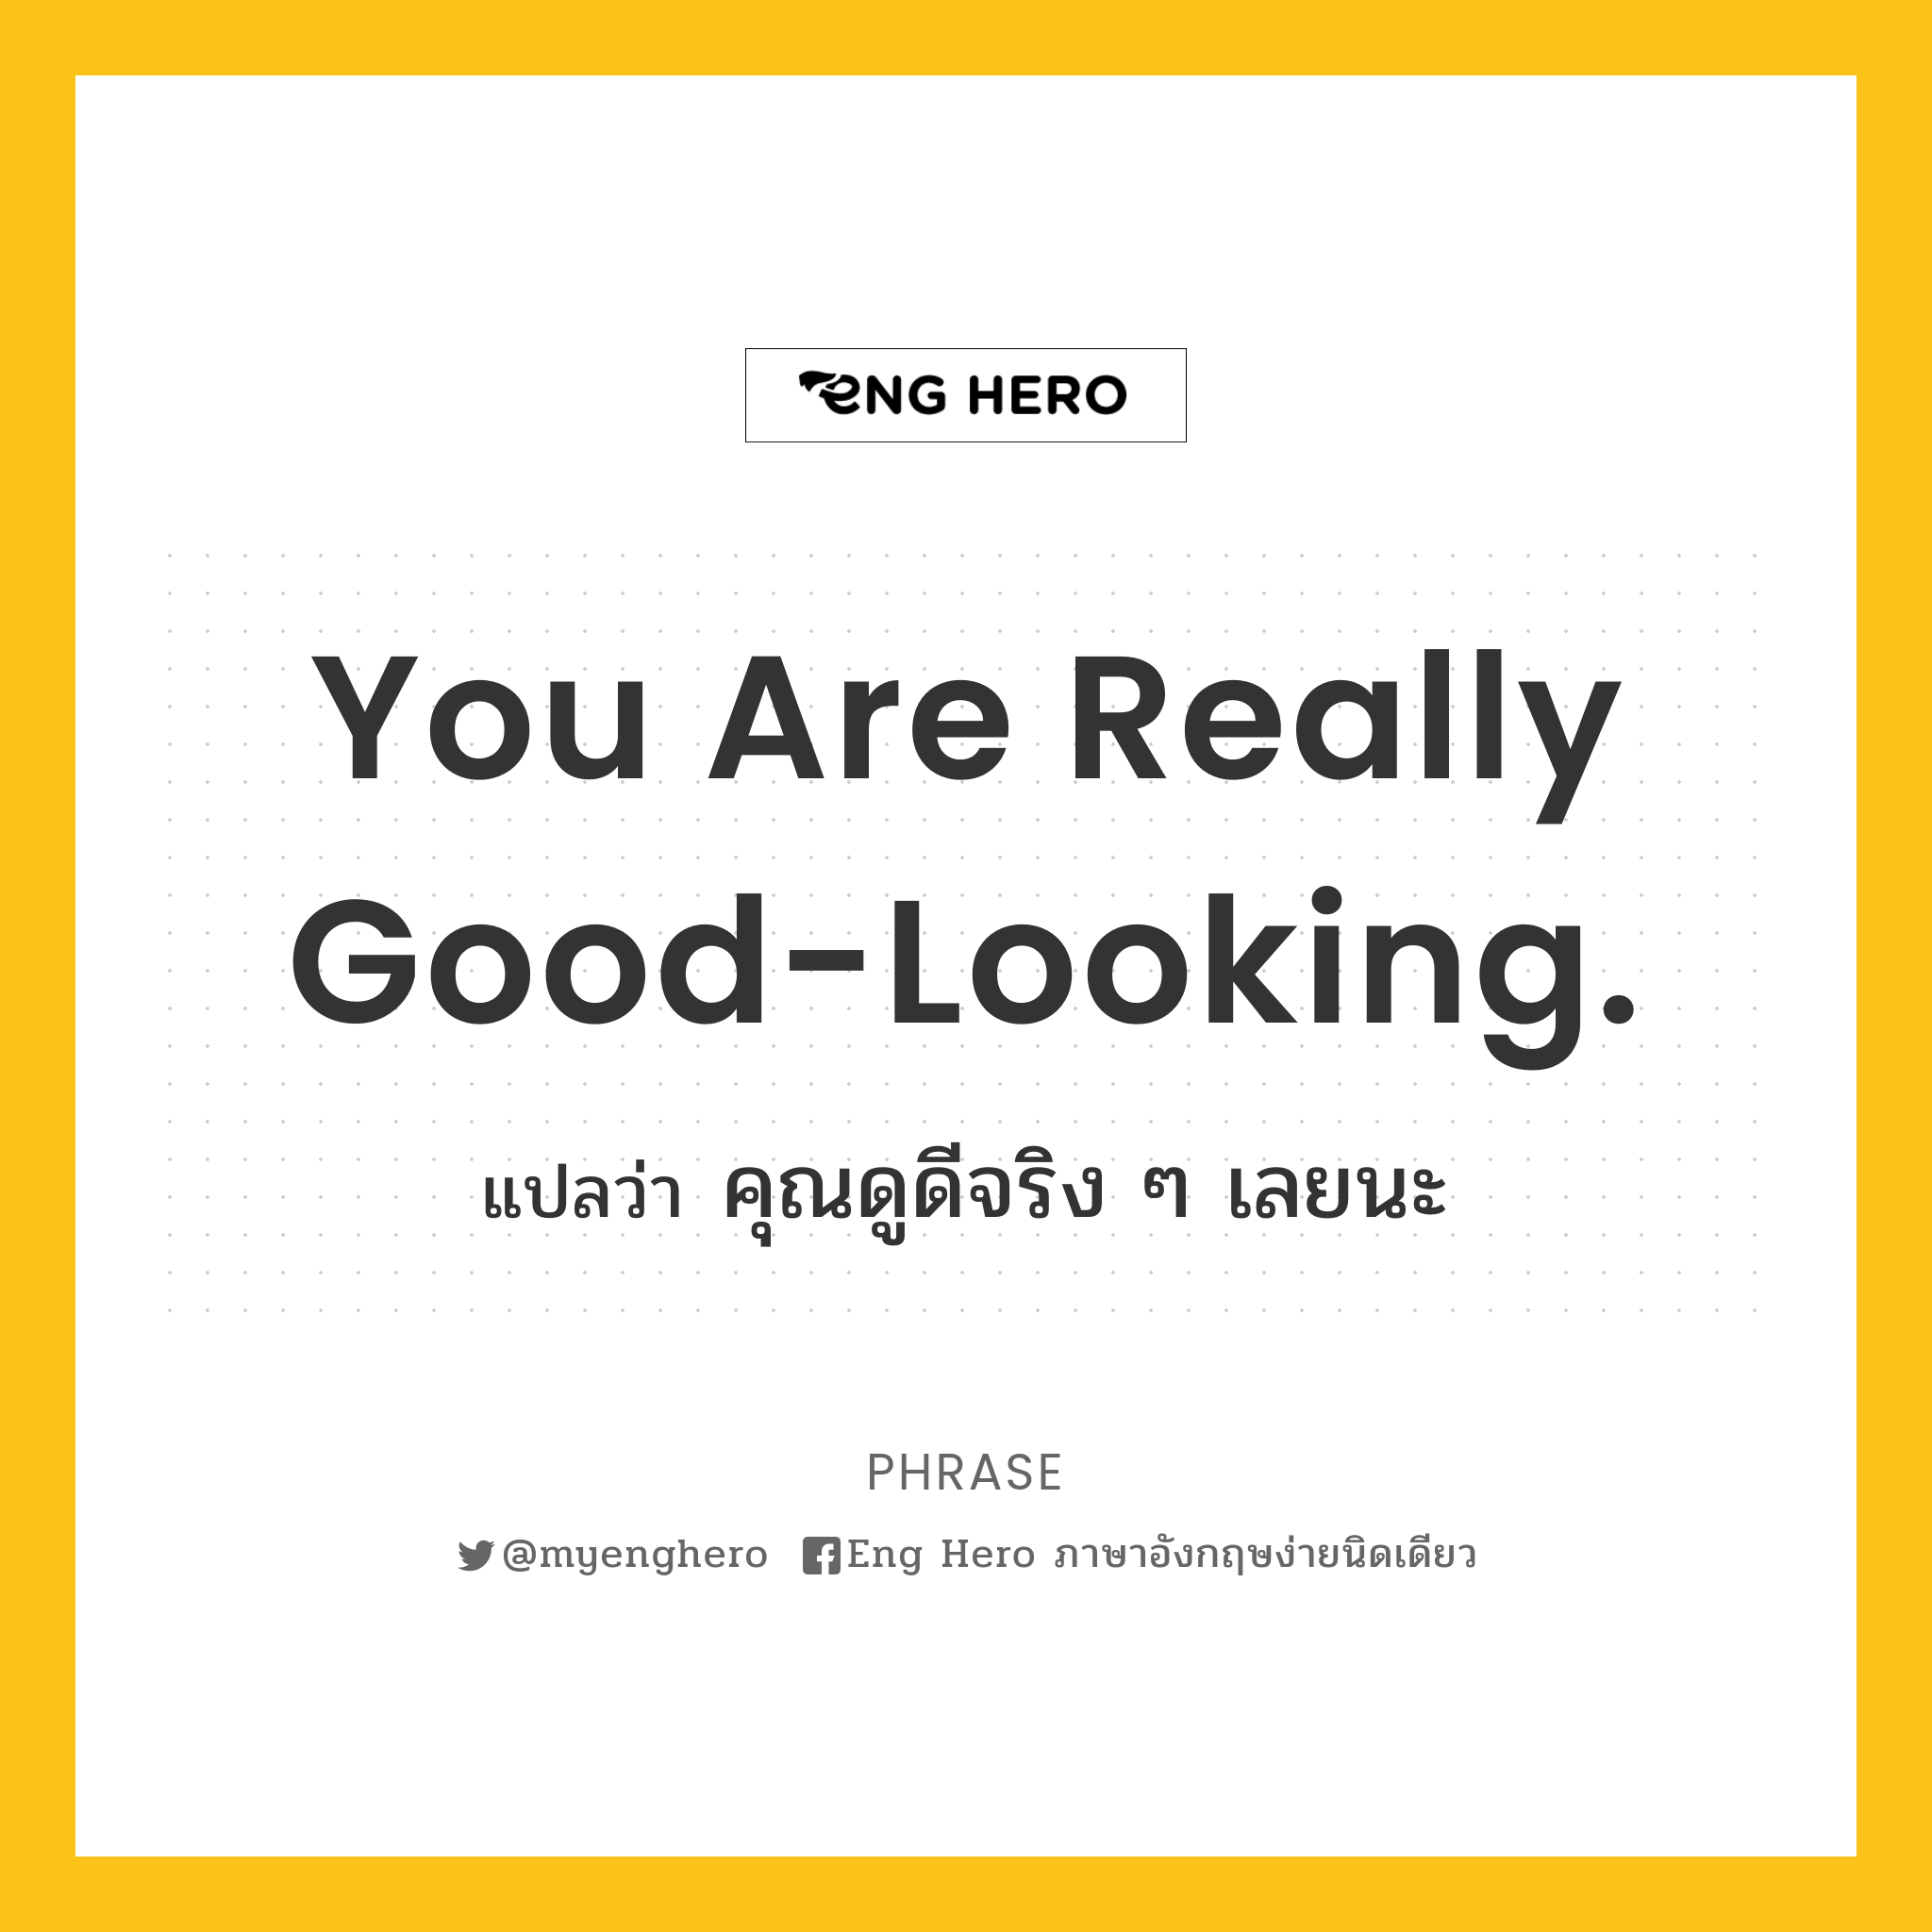 You are really good-looking.